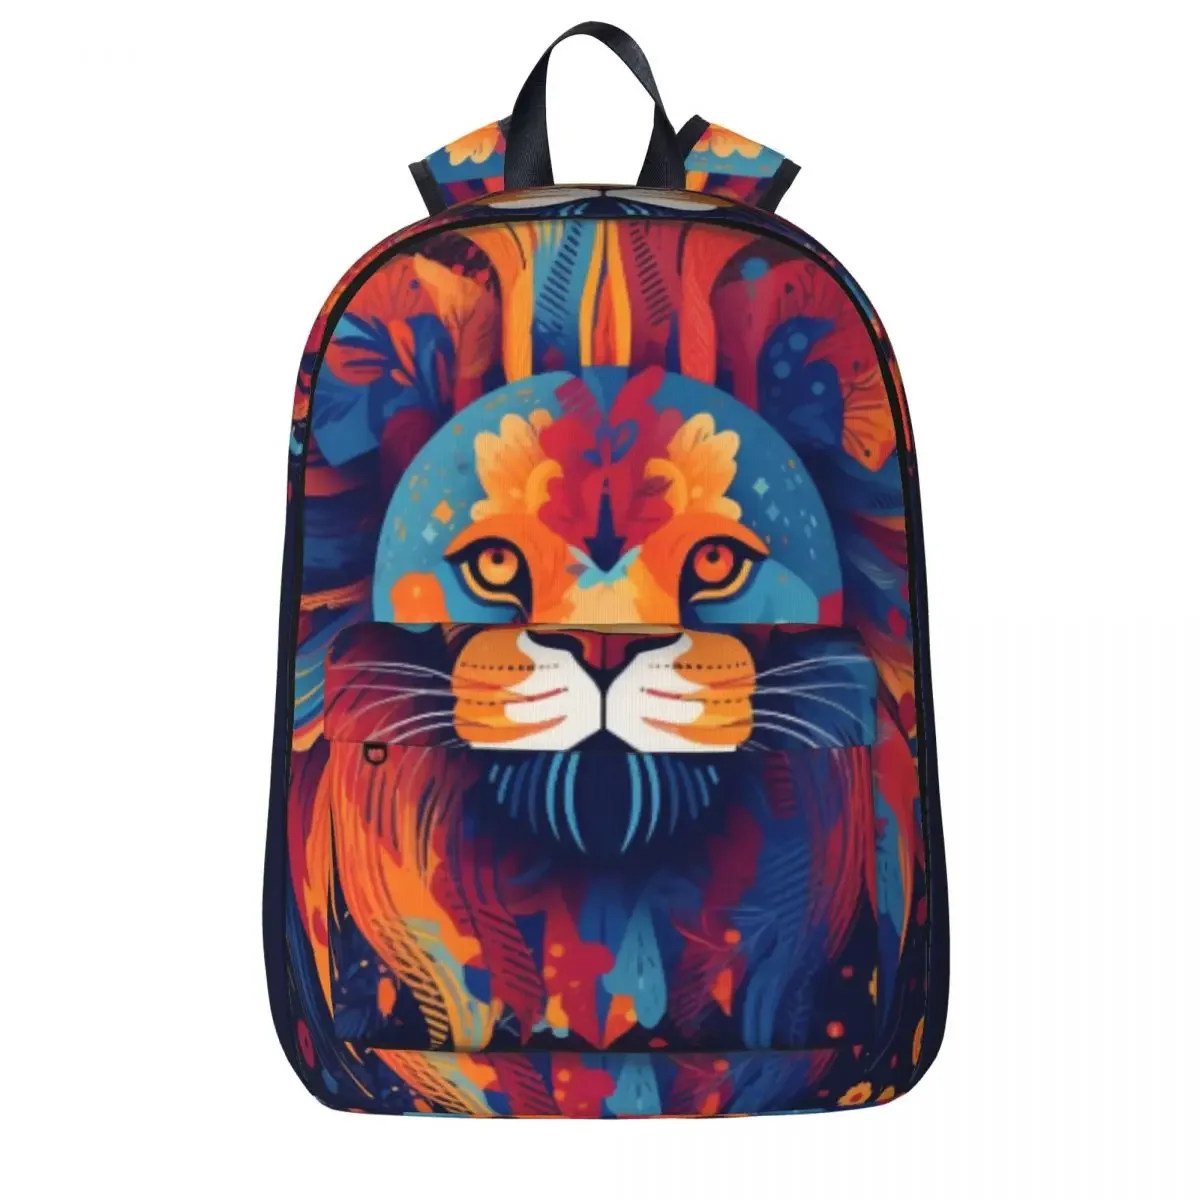 

Lion Backpack Abstraction Illustration Kawaii Backpacks Girl College Durable School Bags High Quality Rucksack